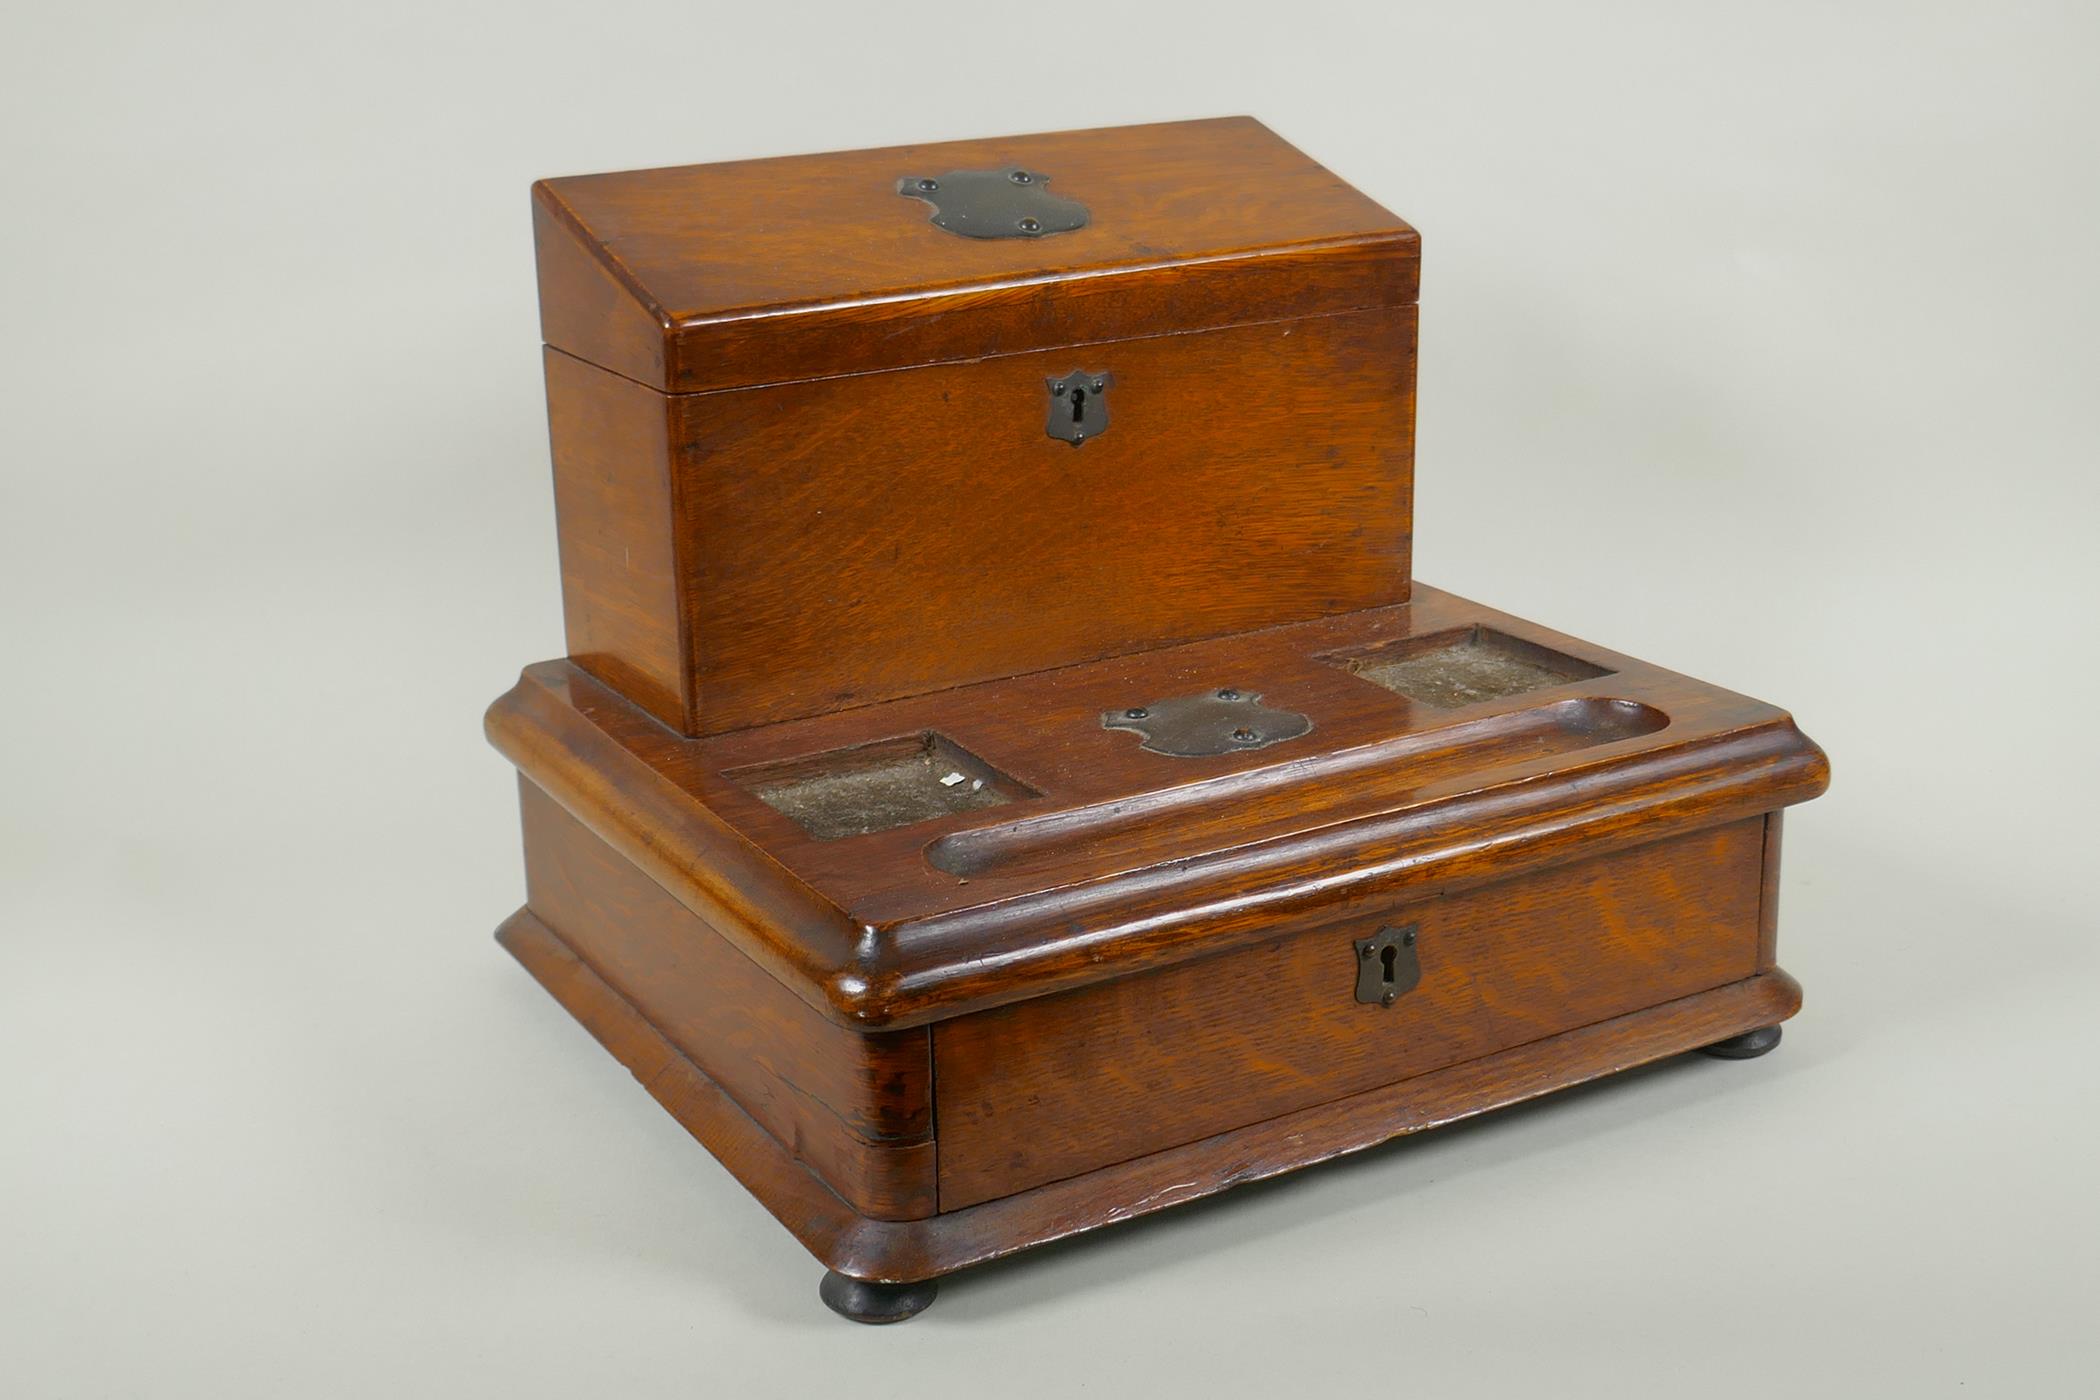 An antique oak correspondence box with metal mounts, 30 x 33cm, 27cm high - Image 2 of 3